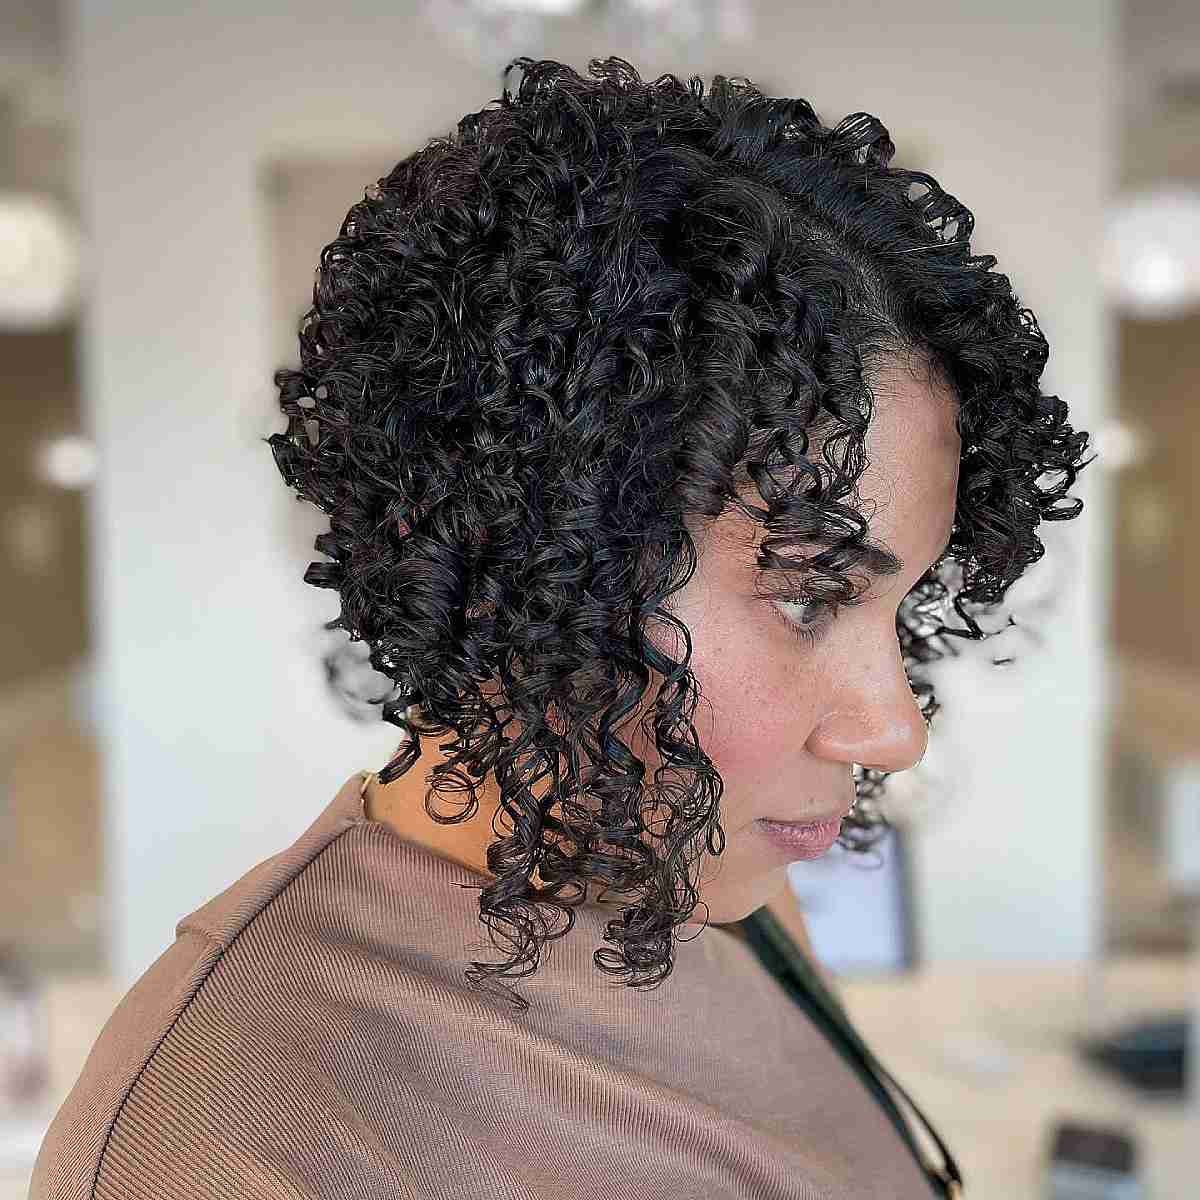 Short angled bob for curly hair